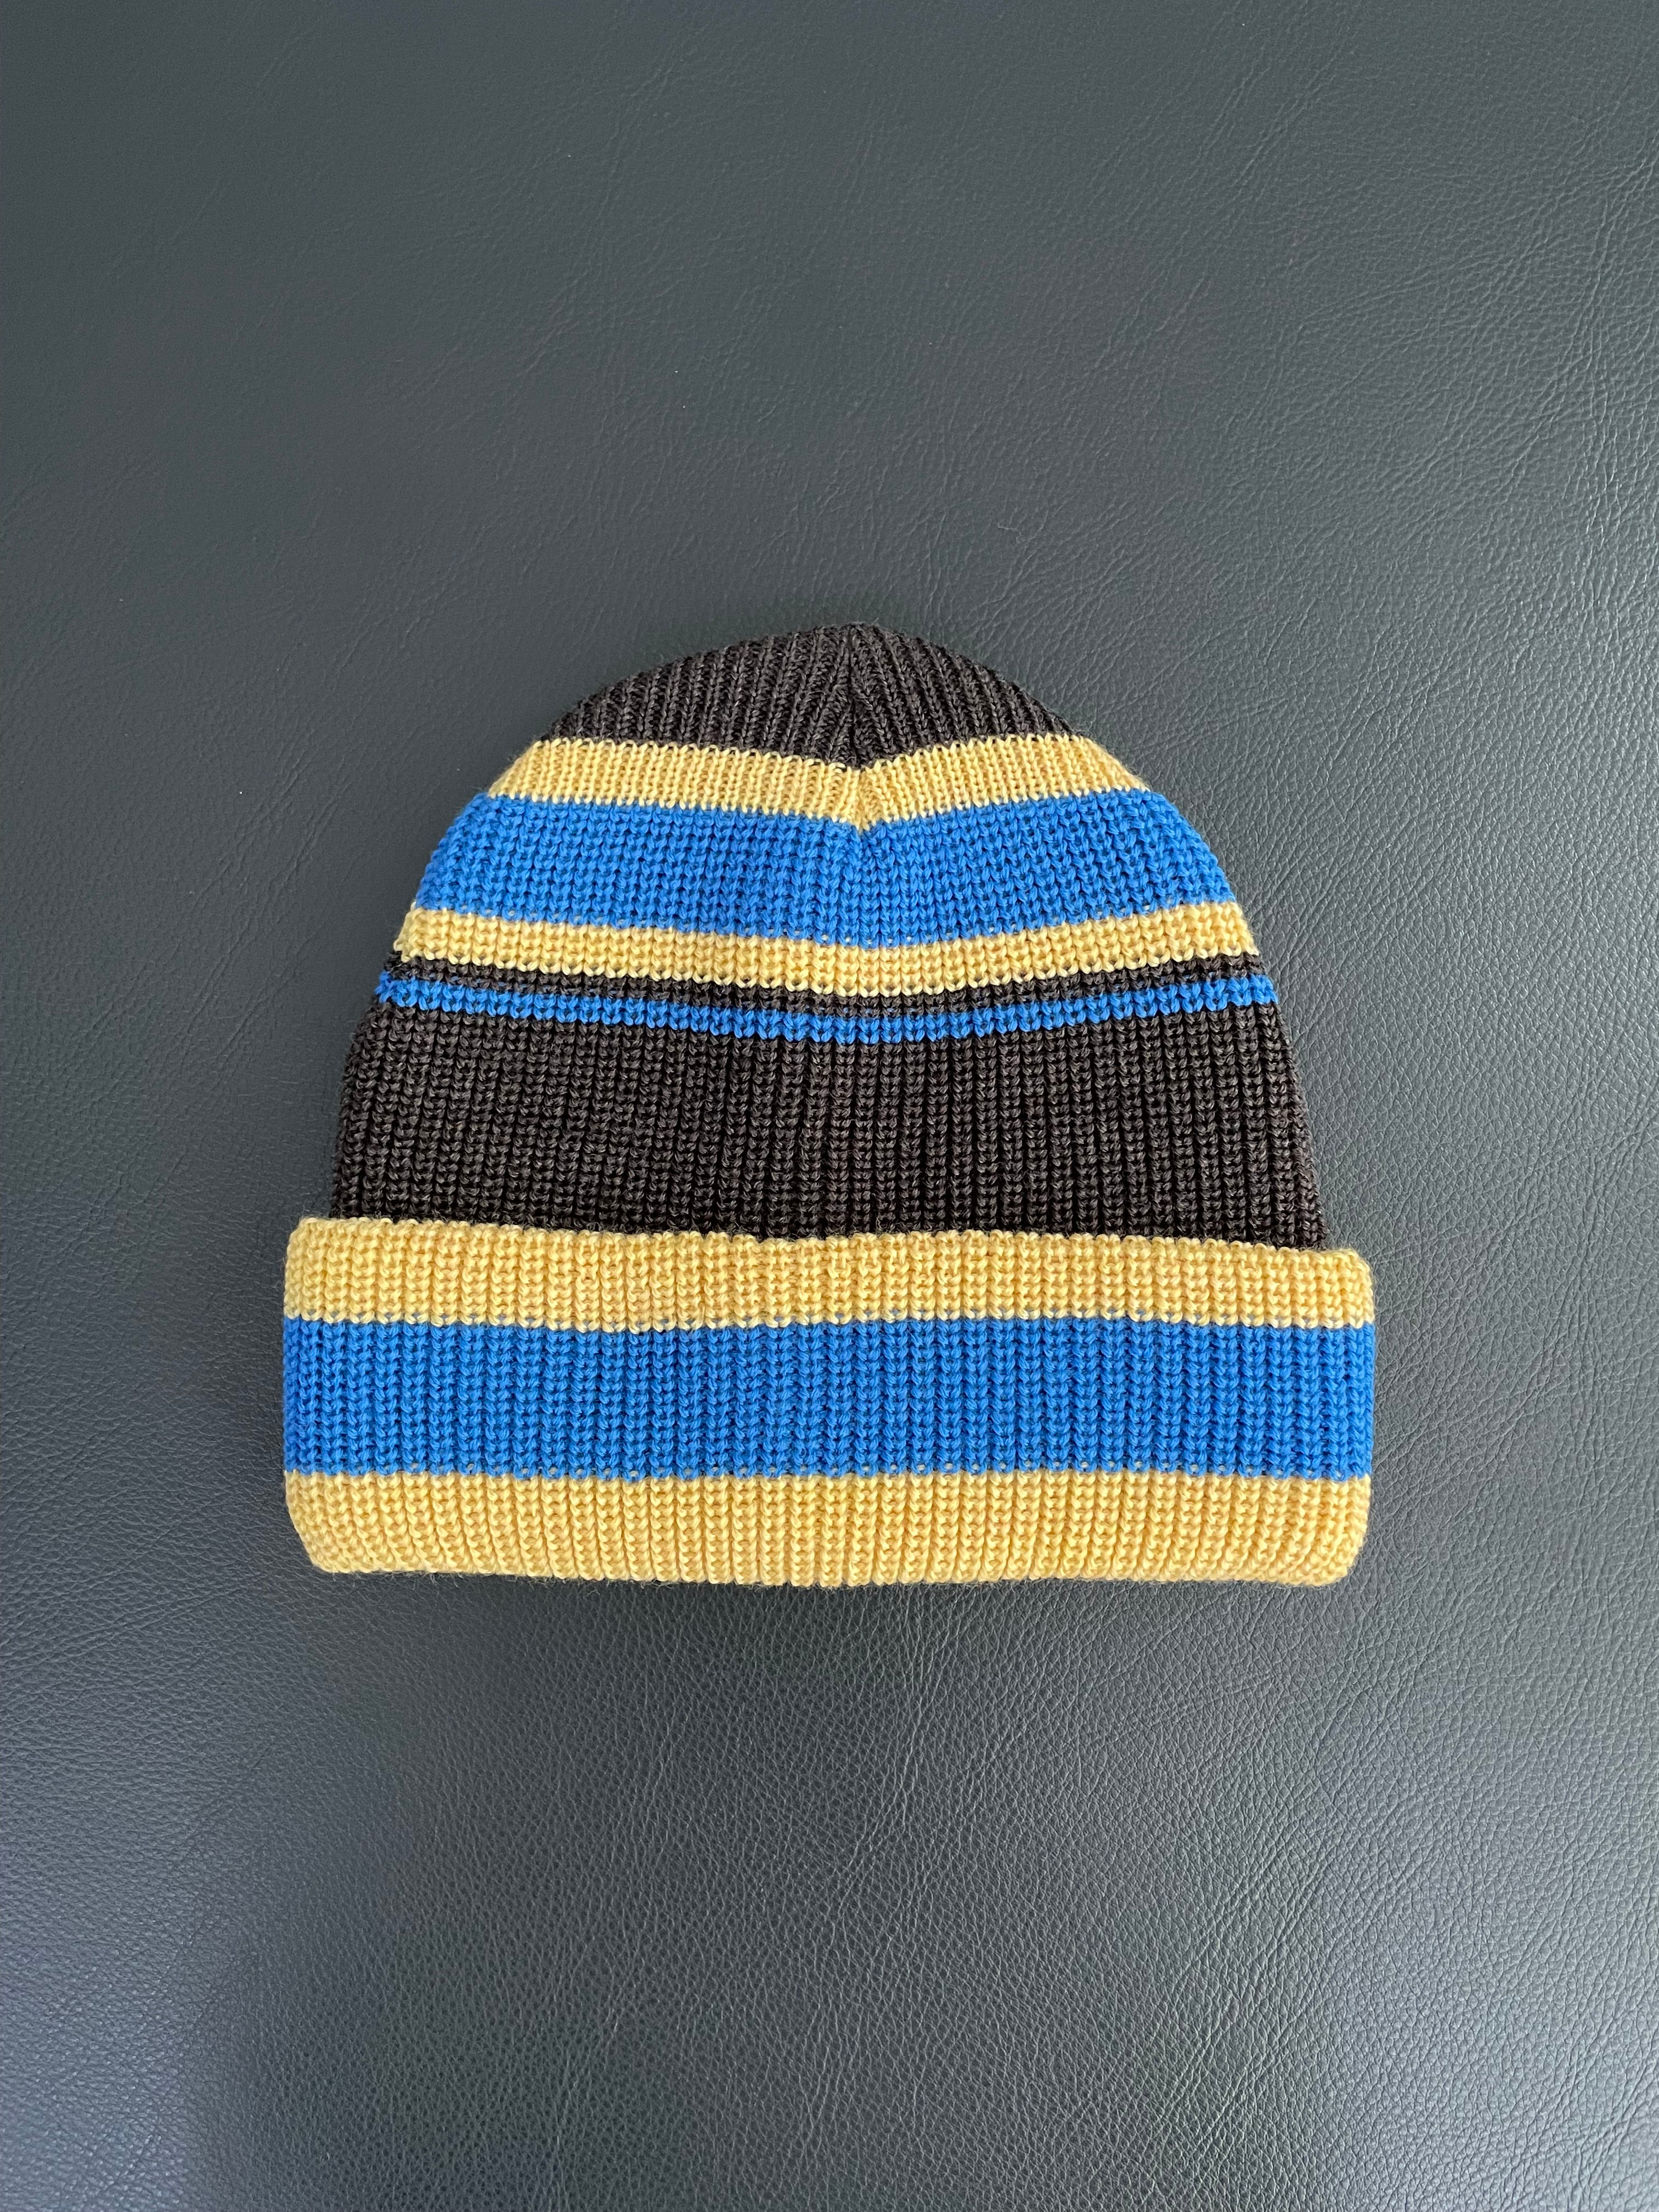 CONFECTION BEANIE/コンフェクション ビーニー(BLUE)NOROLL 